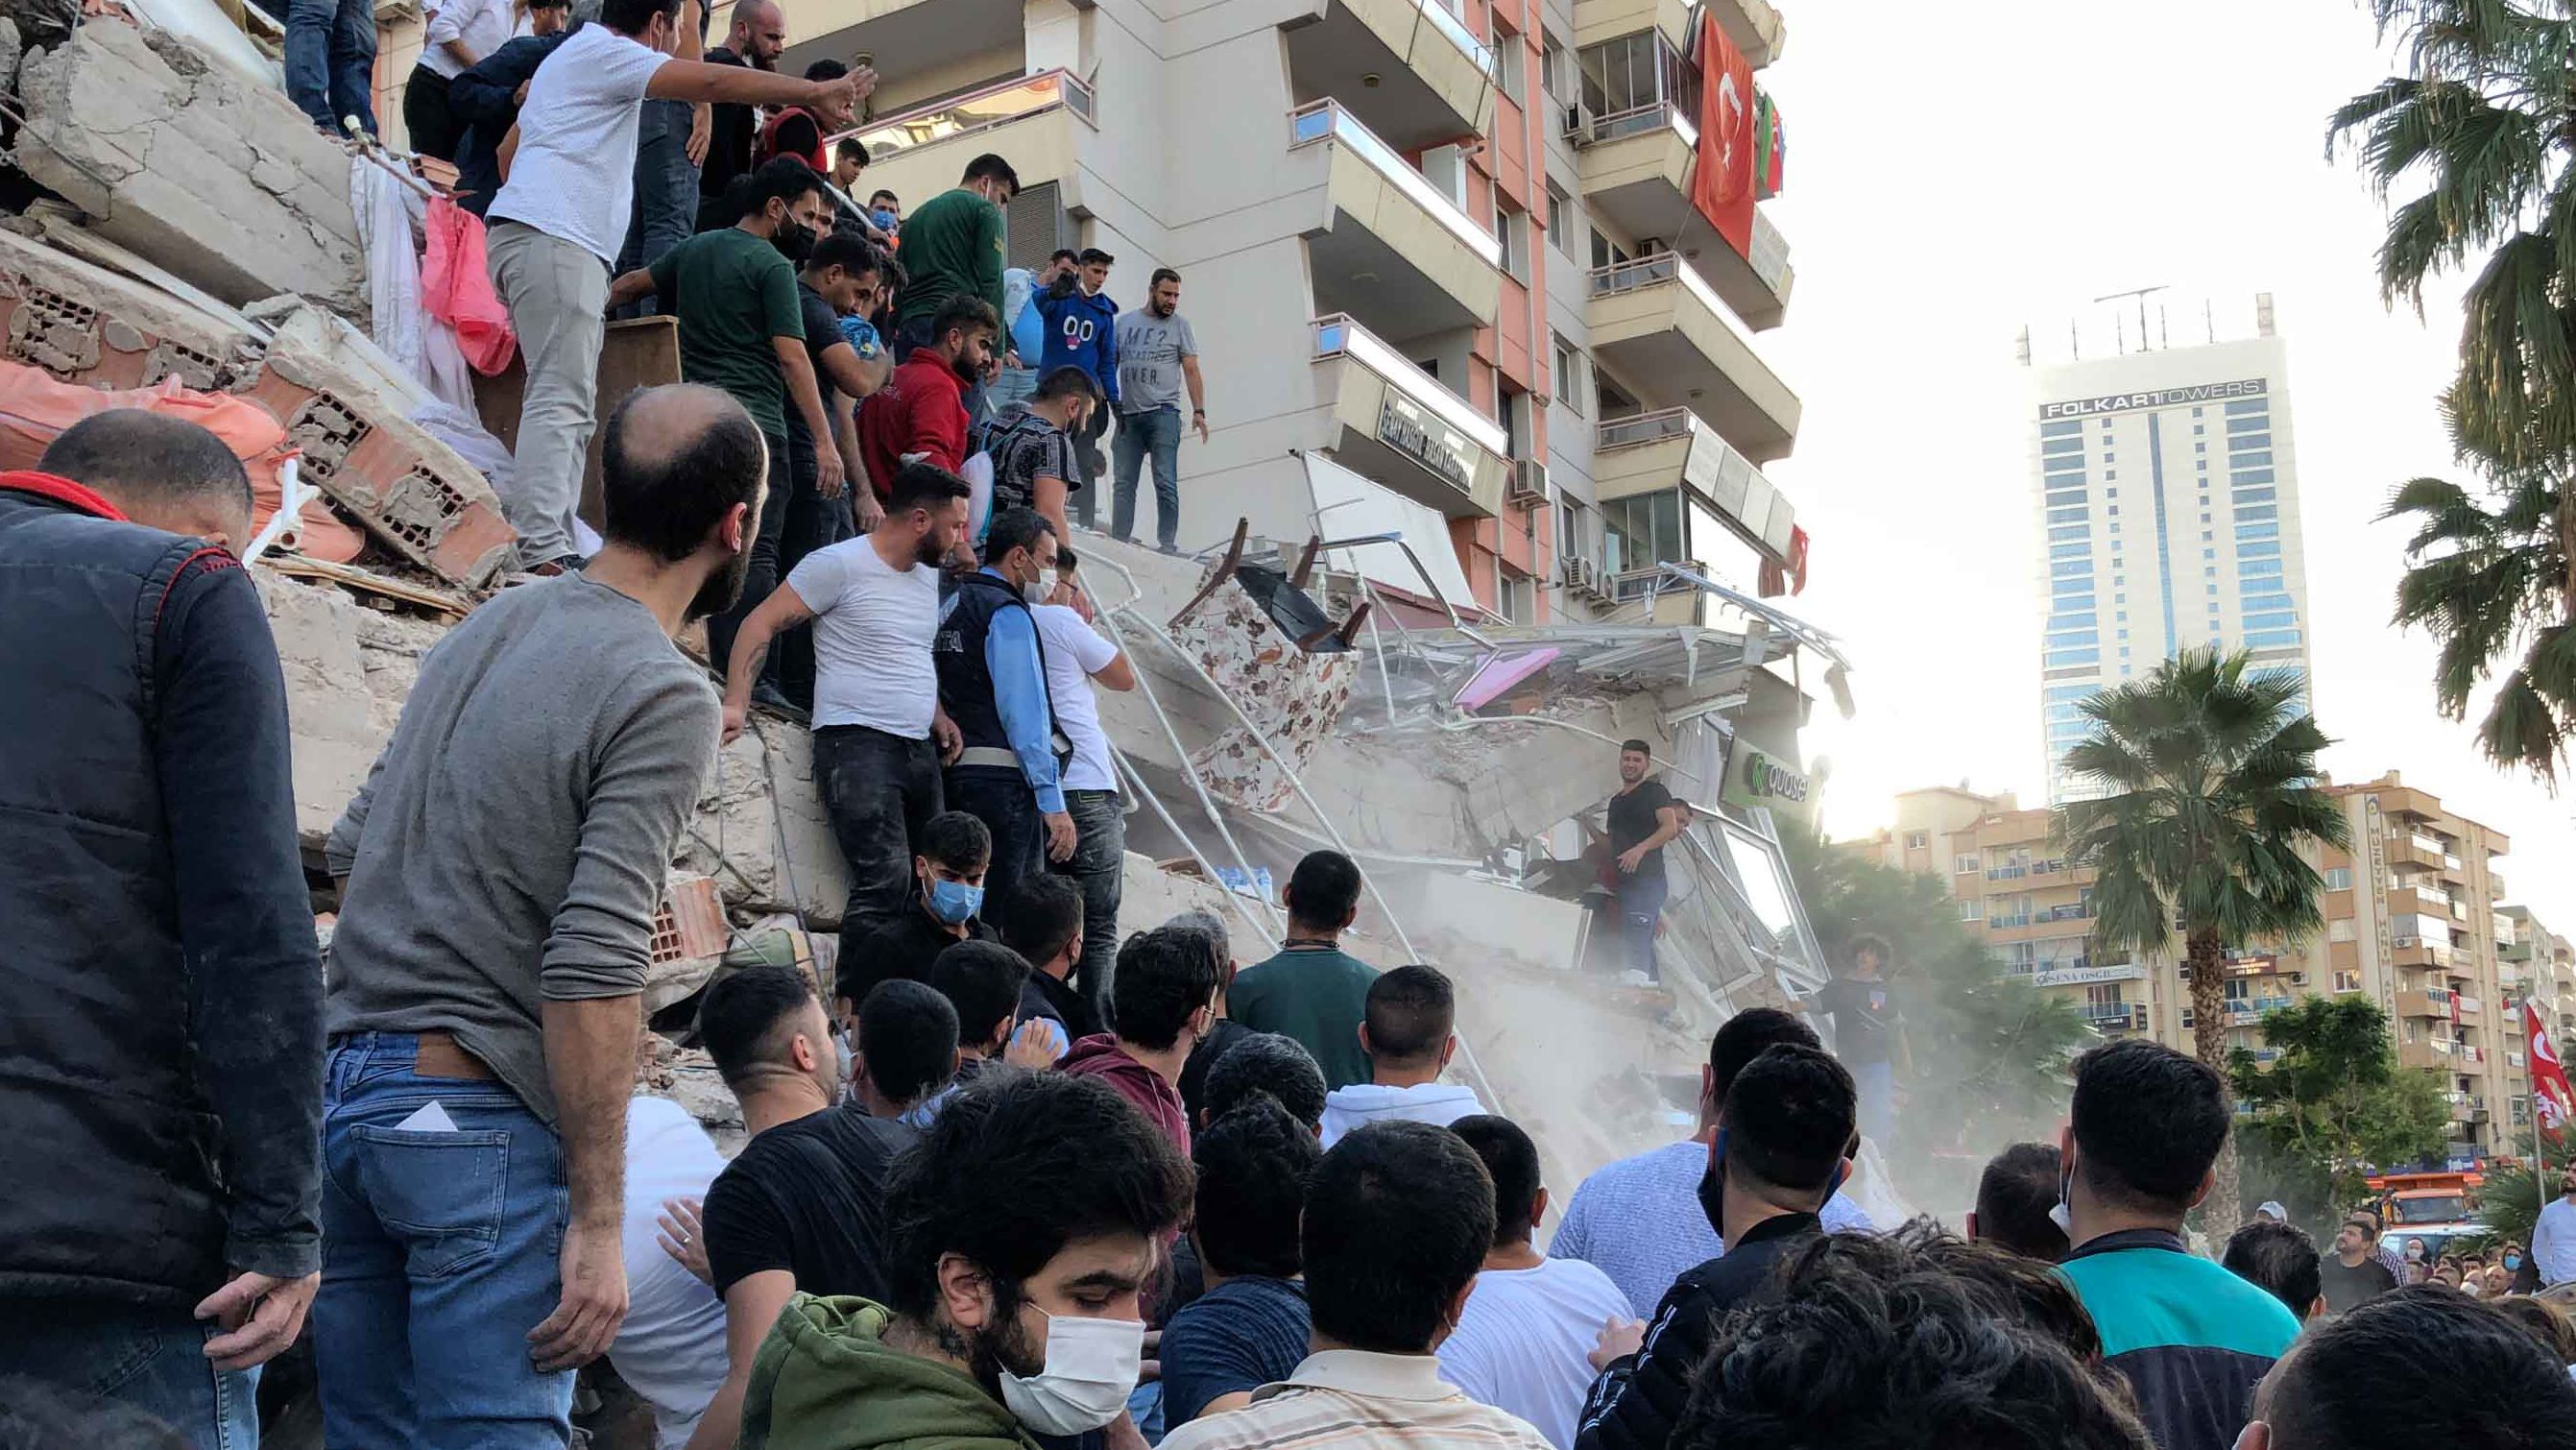 People try to save residents trapped in the debris of a collapsed building in Izmir on Friday, October 30.